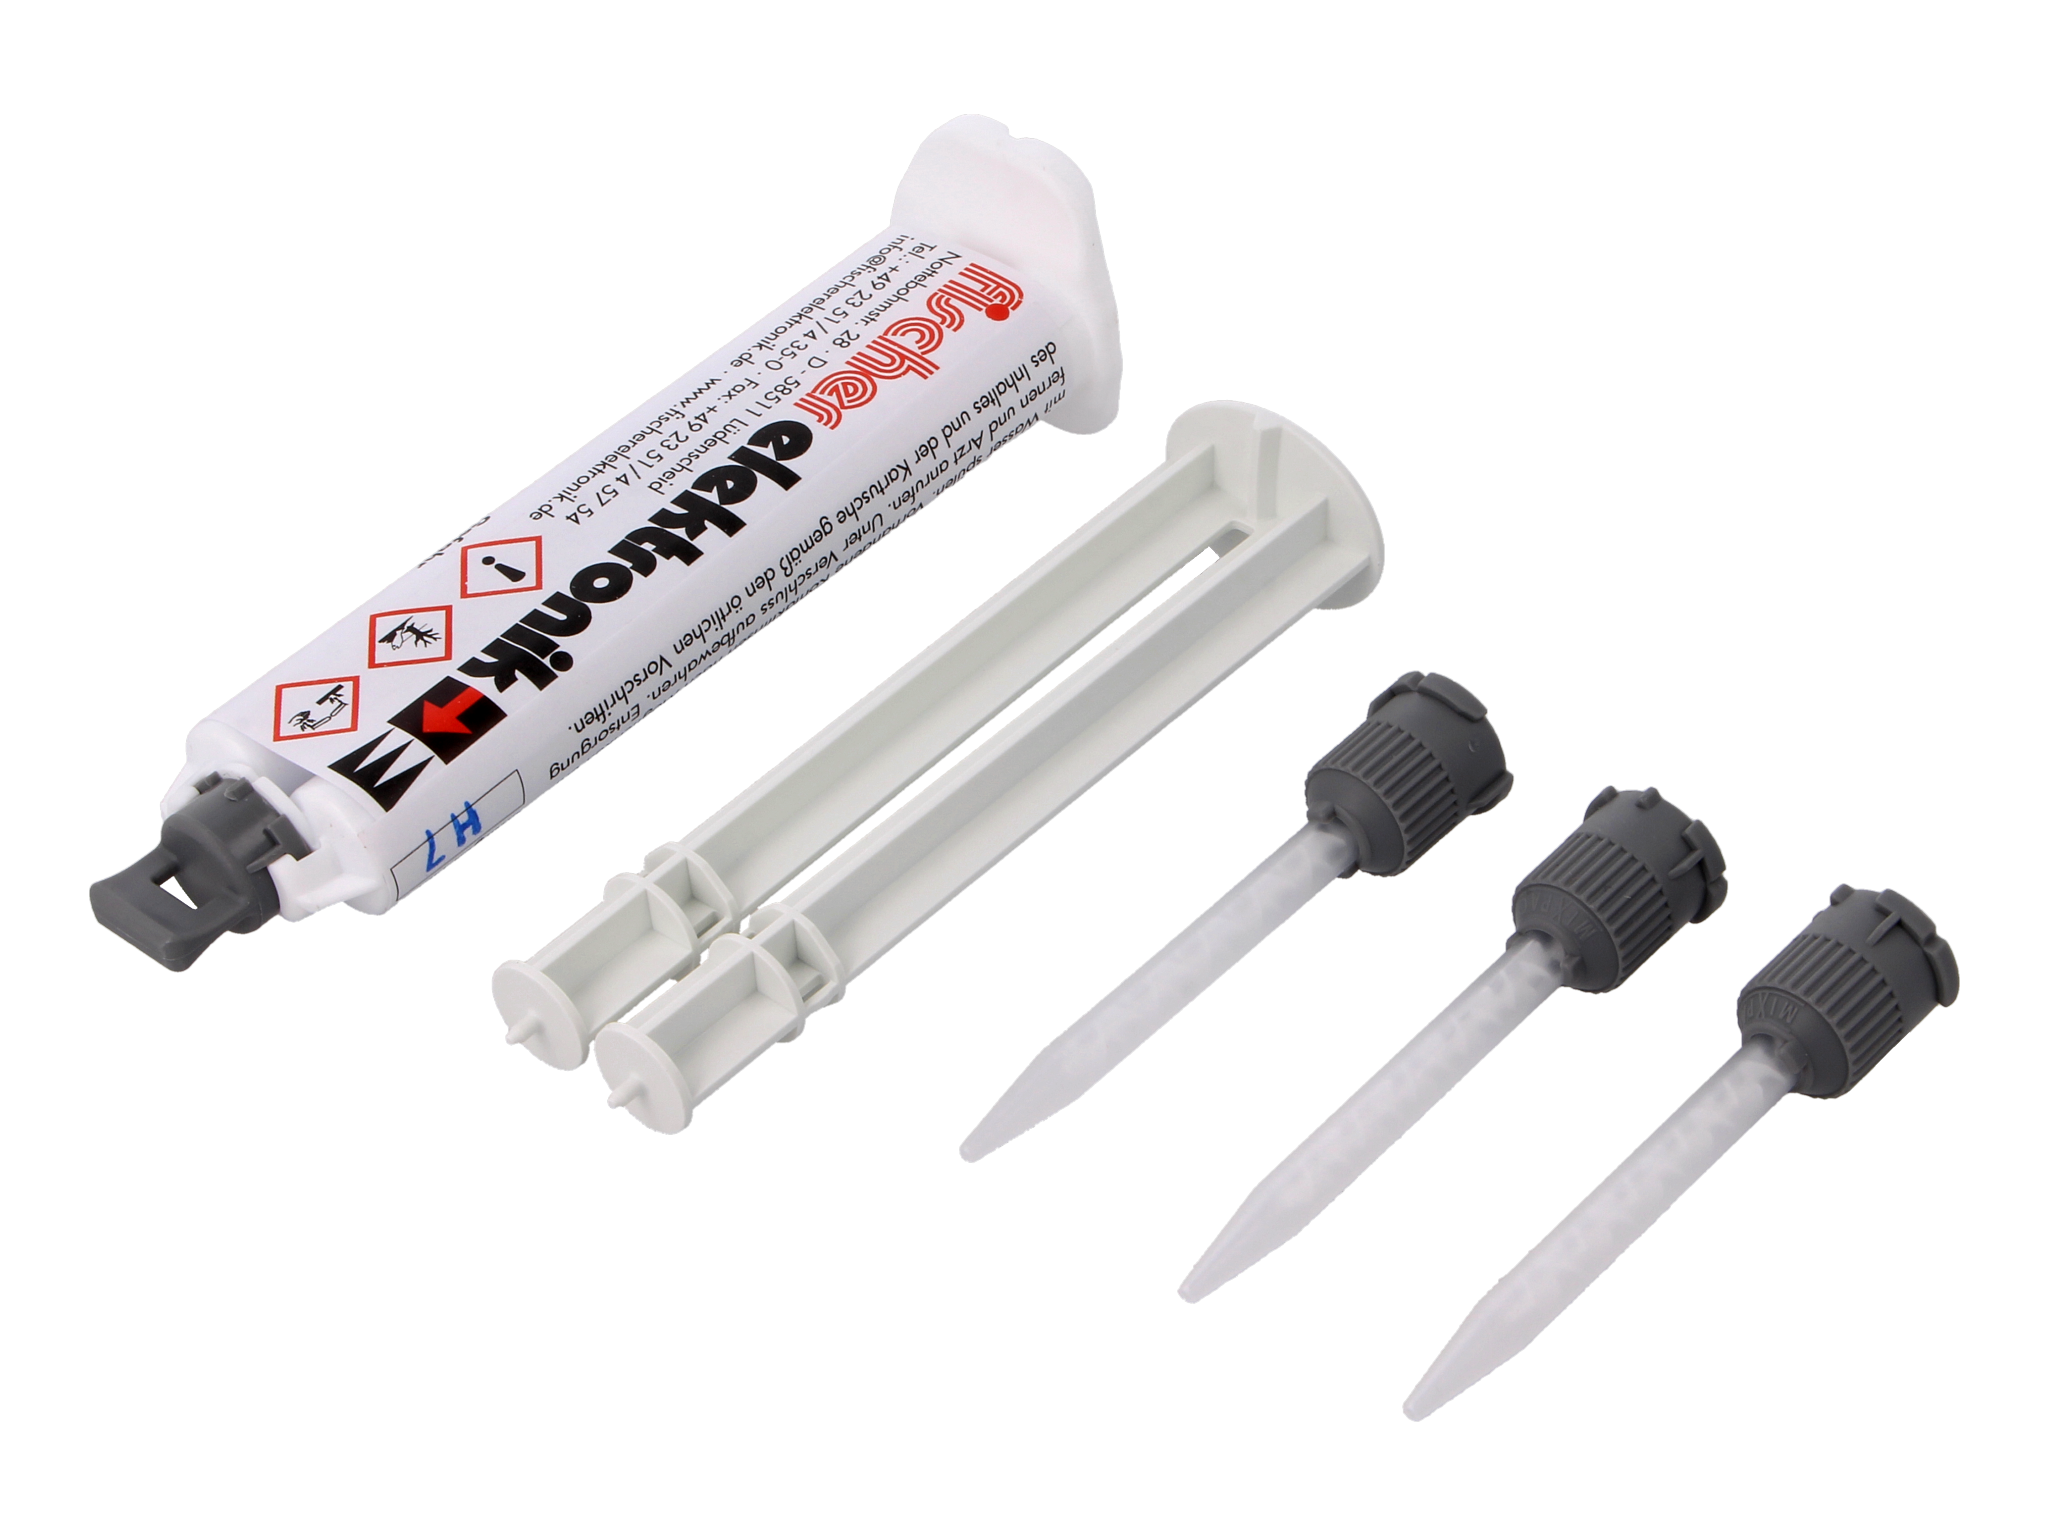 Thermaly conductive adhesive from FISCHER ELEKTRONIK